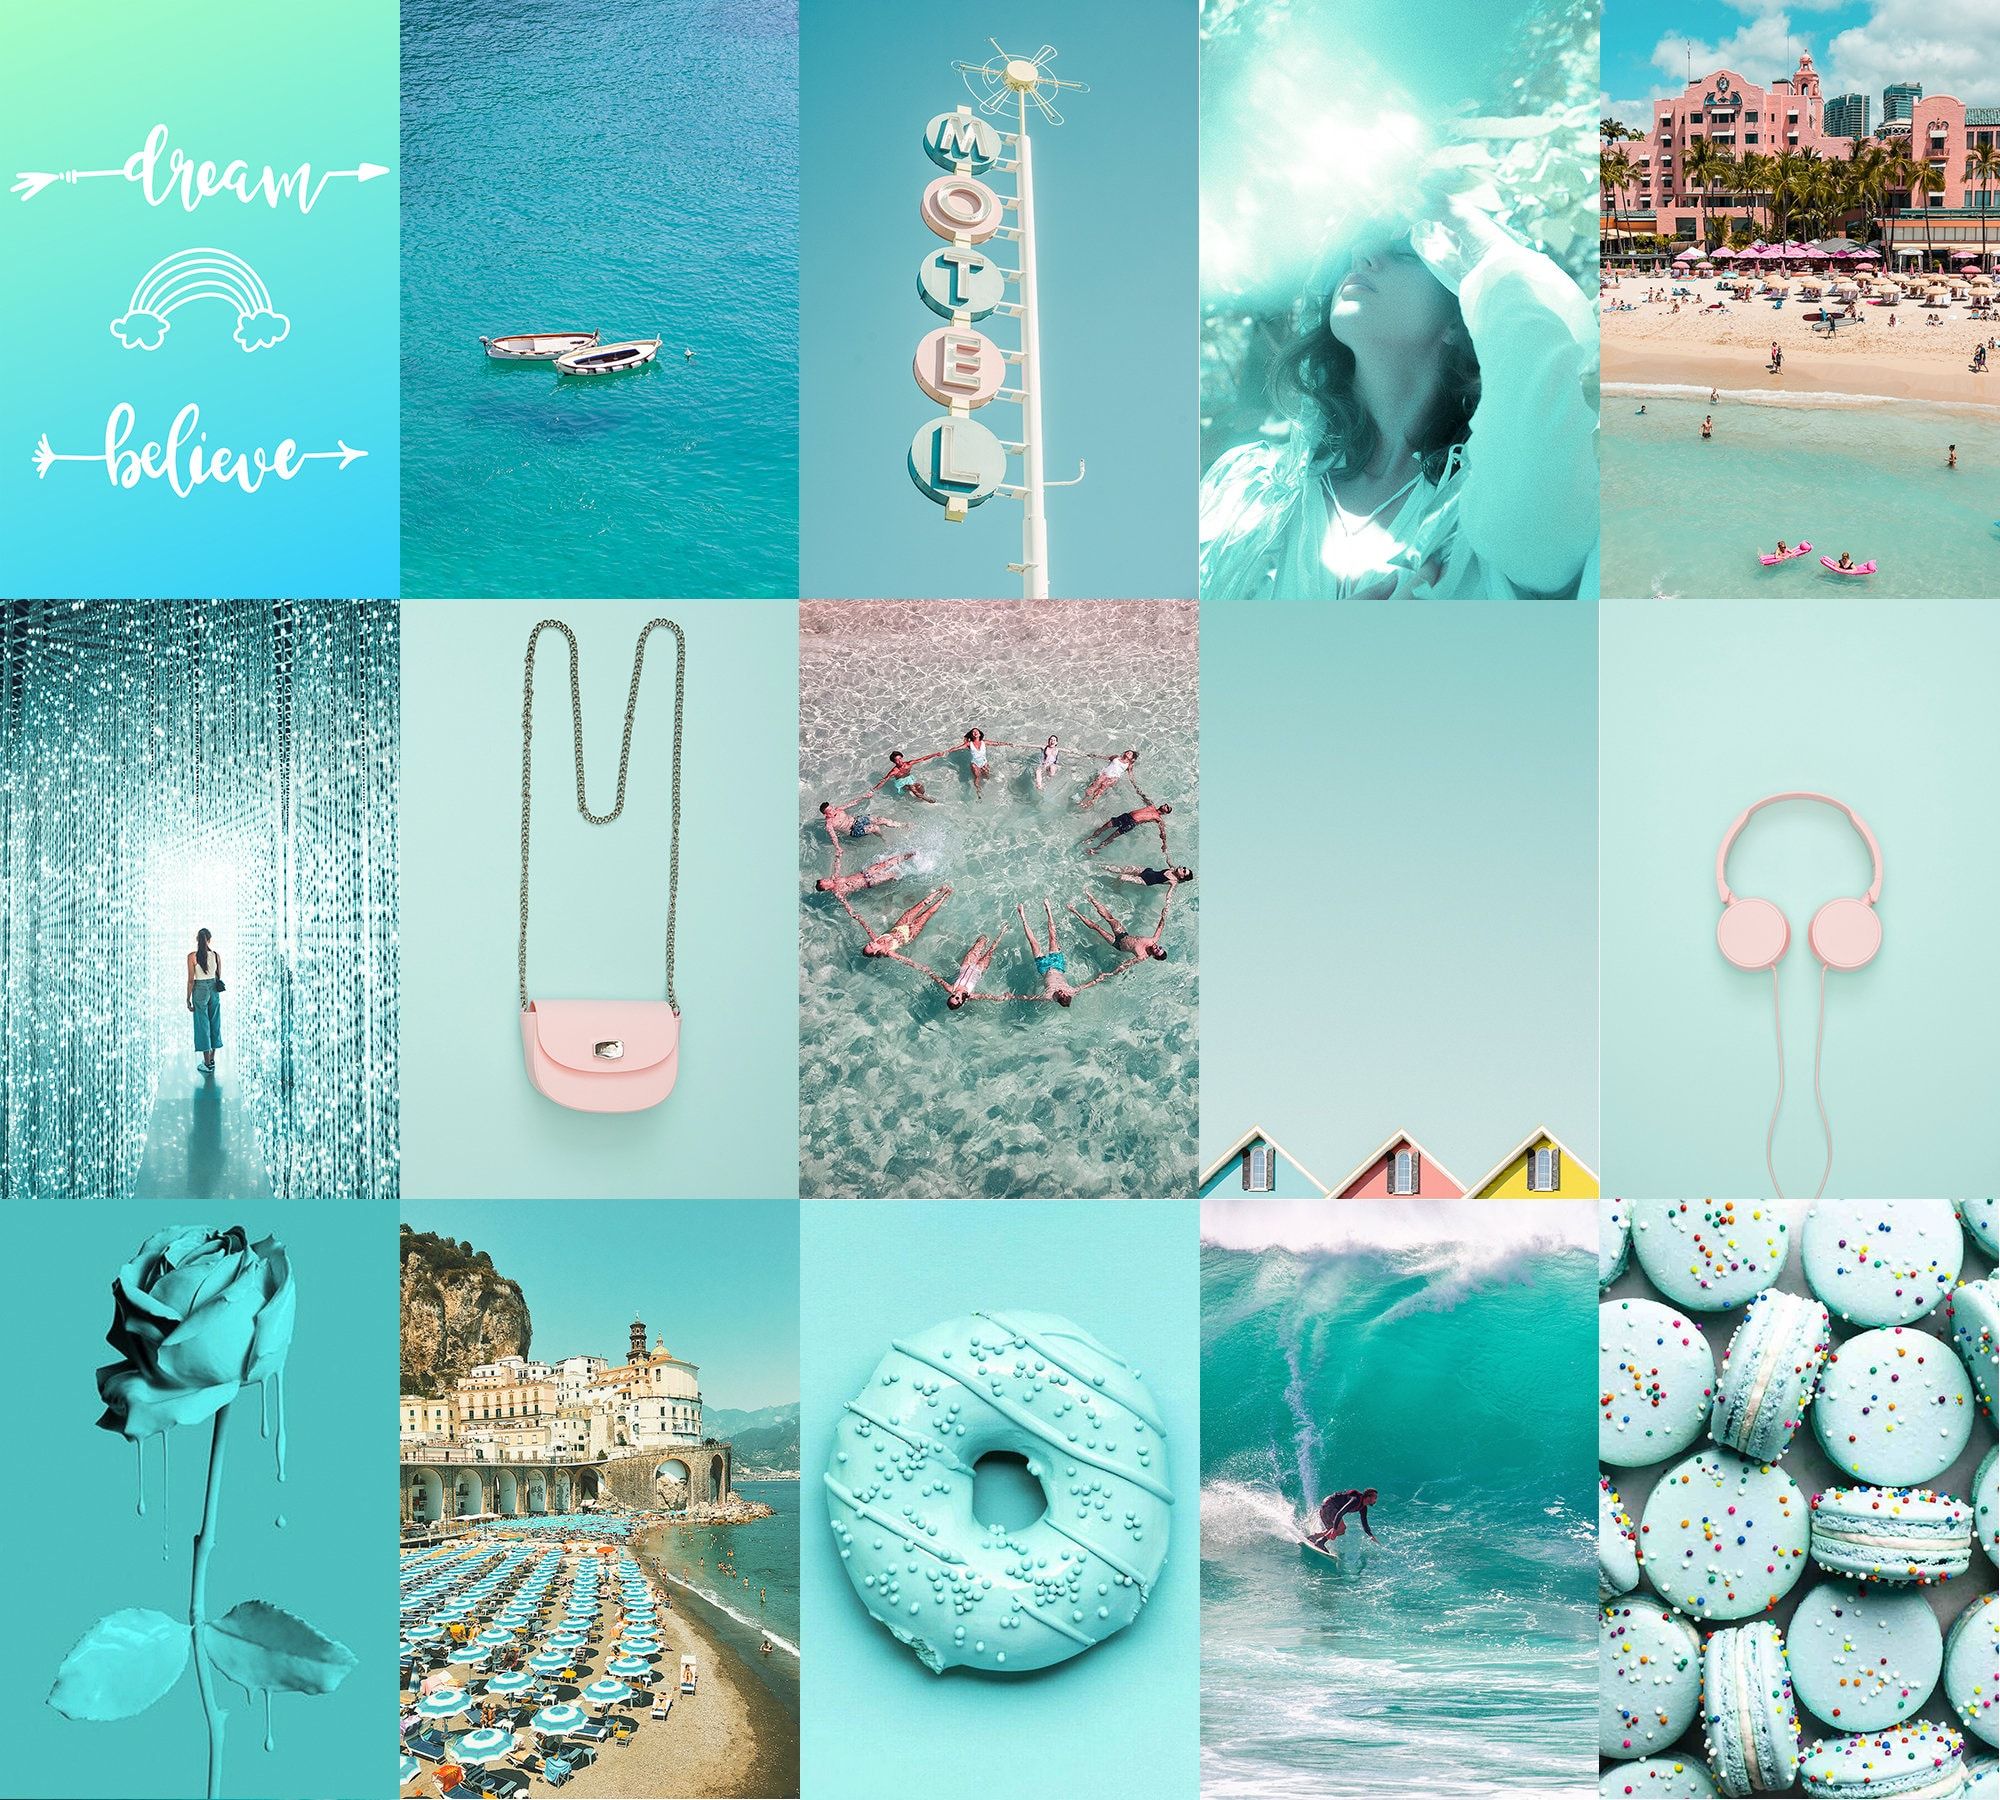 A collage of 12 photos in varying shades of blue and aqua, including the ocean, flamingos, a beach, a rose, and donuts. - Teal